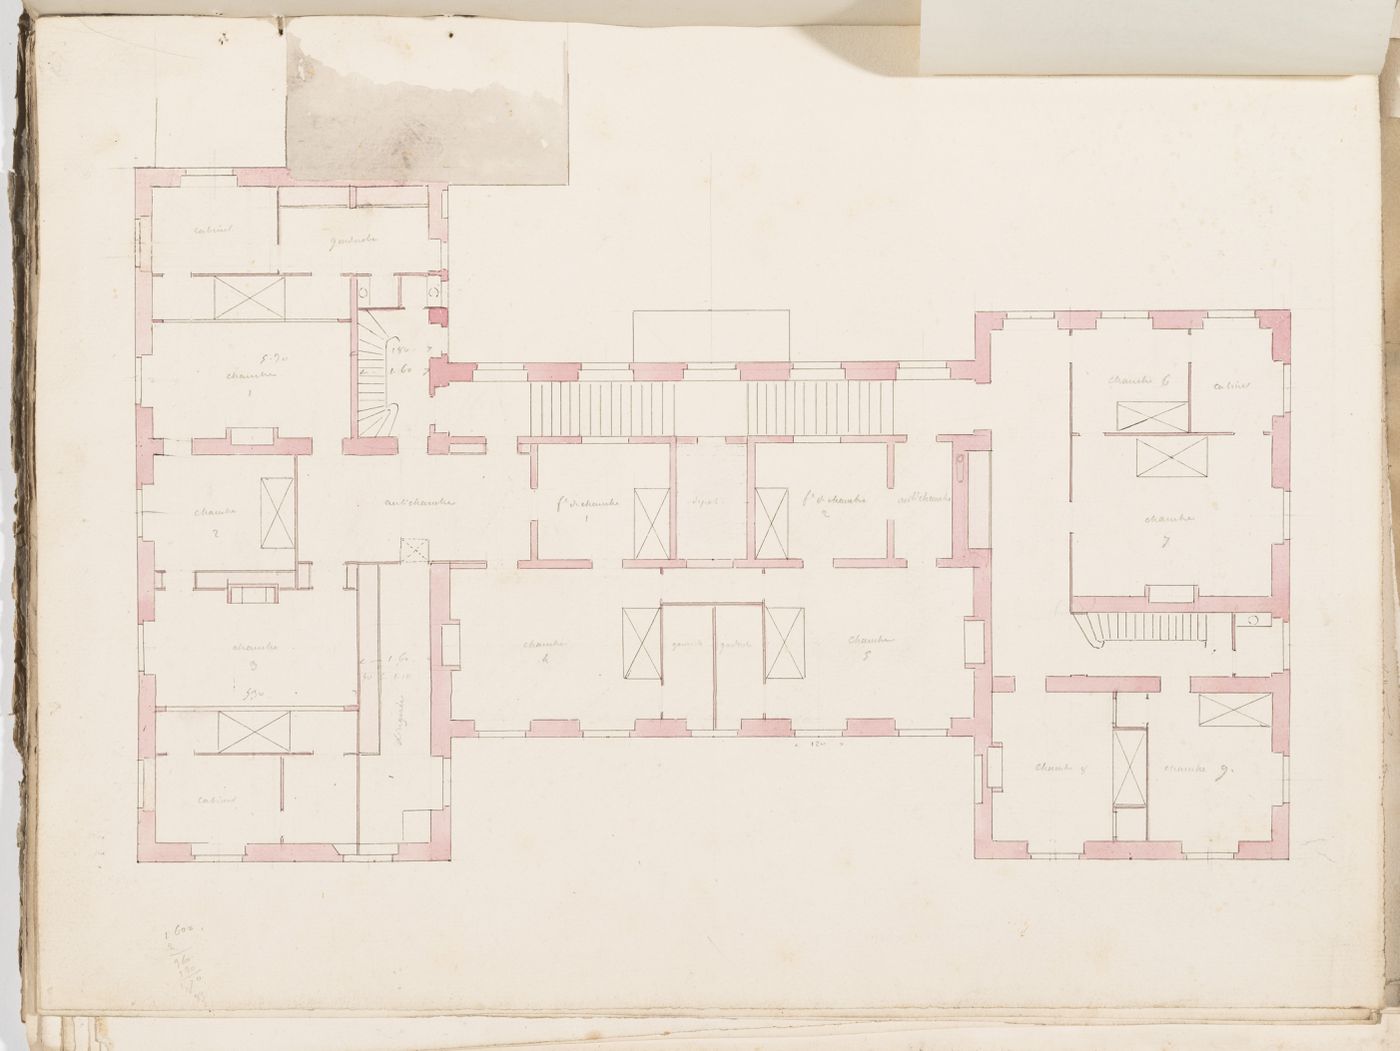 Project no. 7 for a country house for comte Treilhard: Partial first floor plan; verso: Project no. 7 for a country house for comte Treilhard: First floor plan